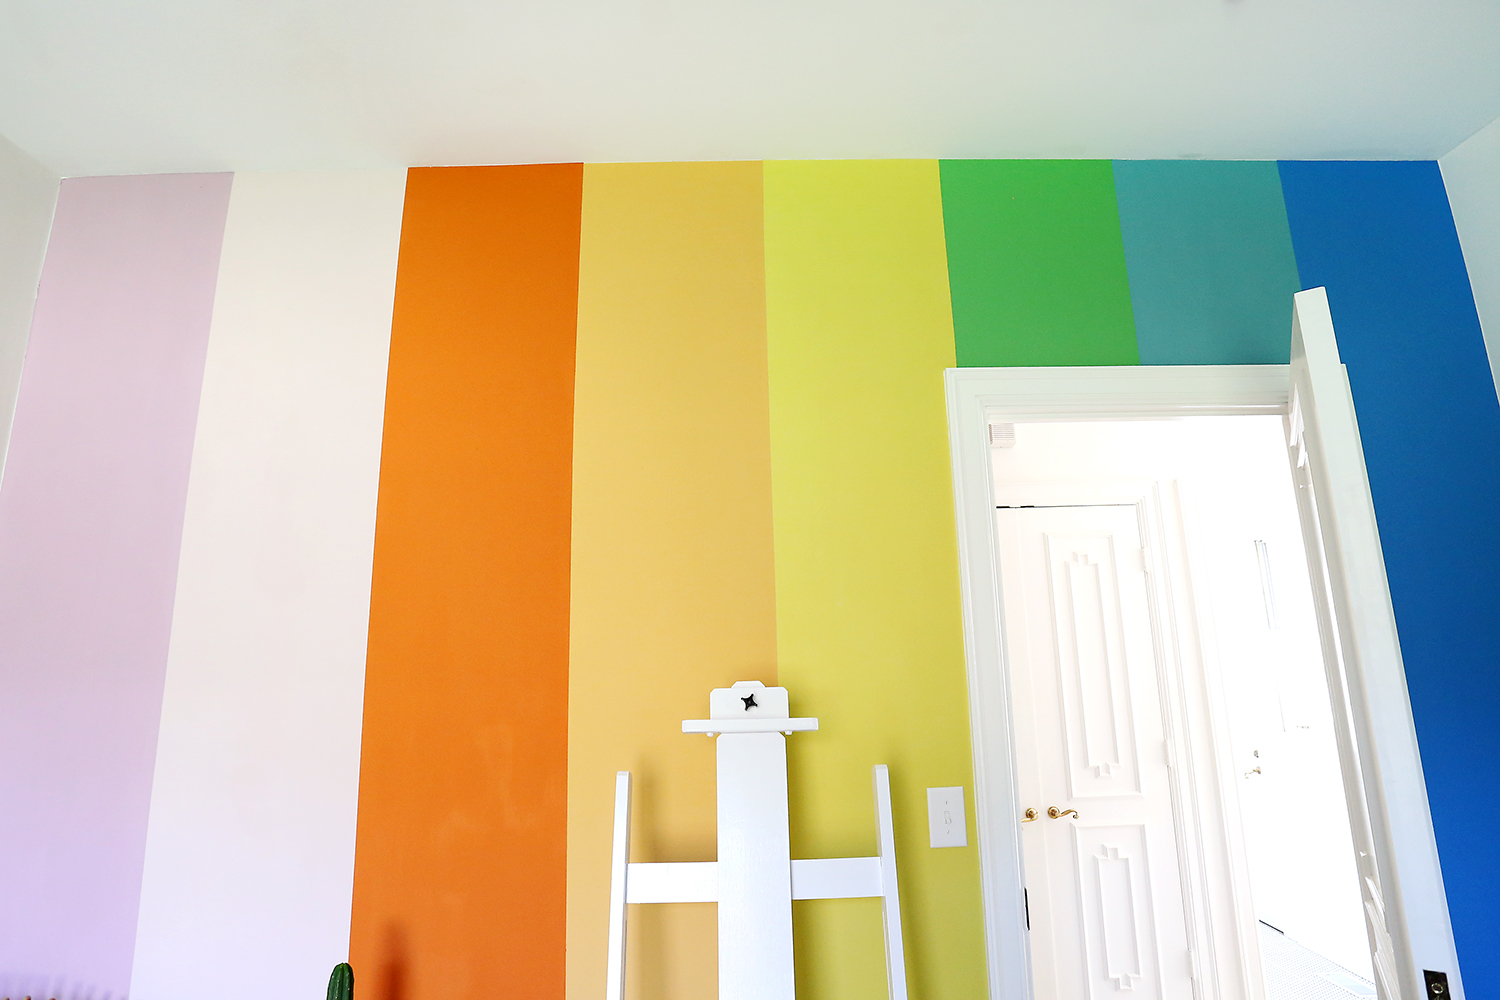 DIY rainbow wall with chalk paint! See more on ABeautifulMess.com 